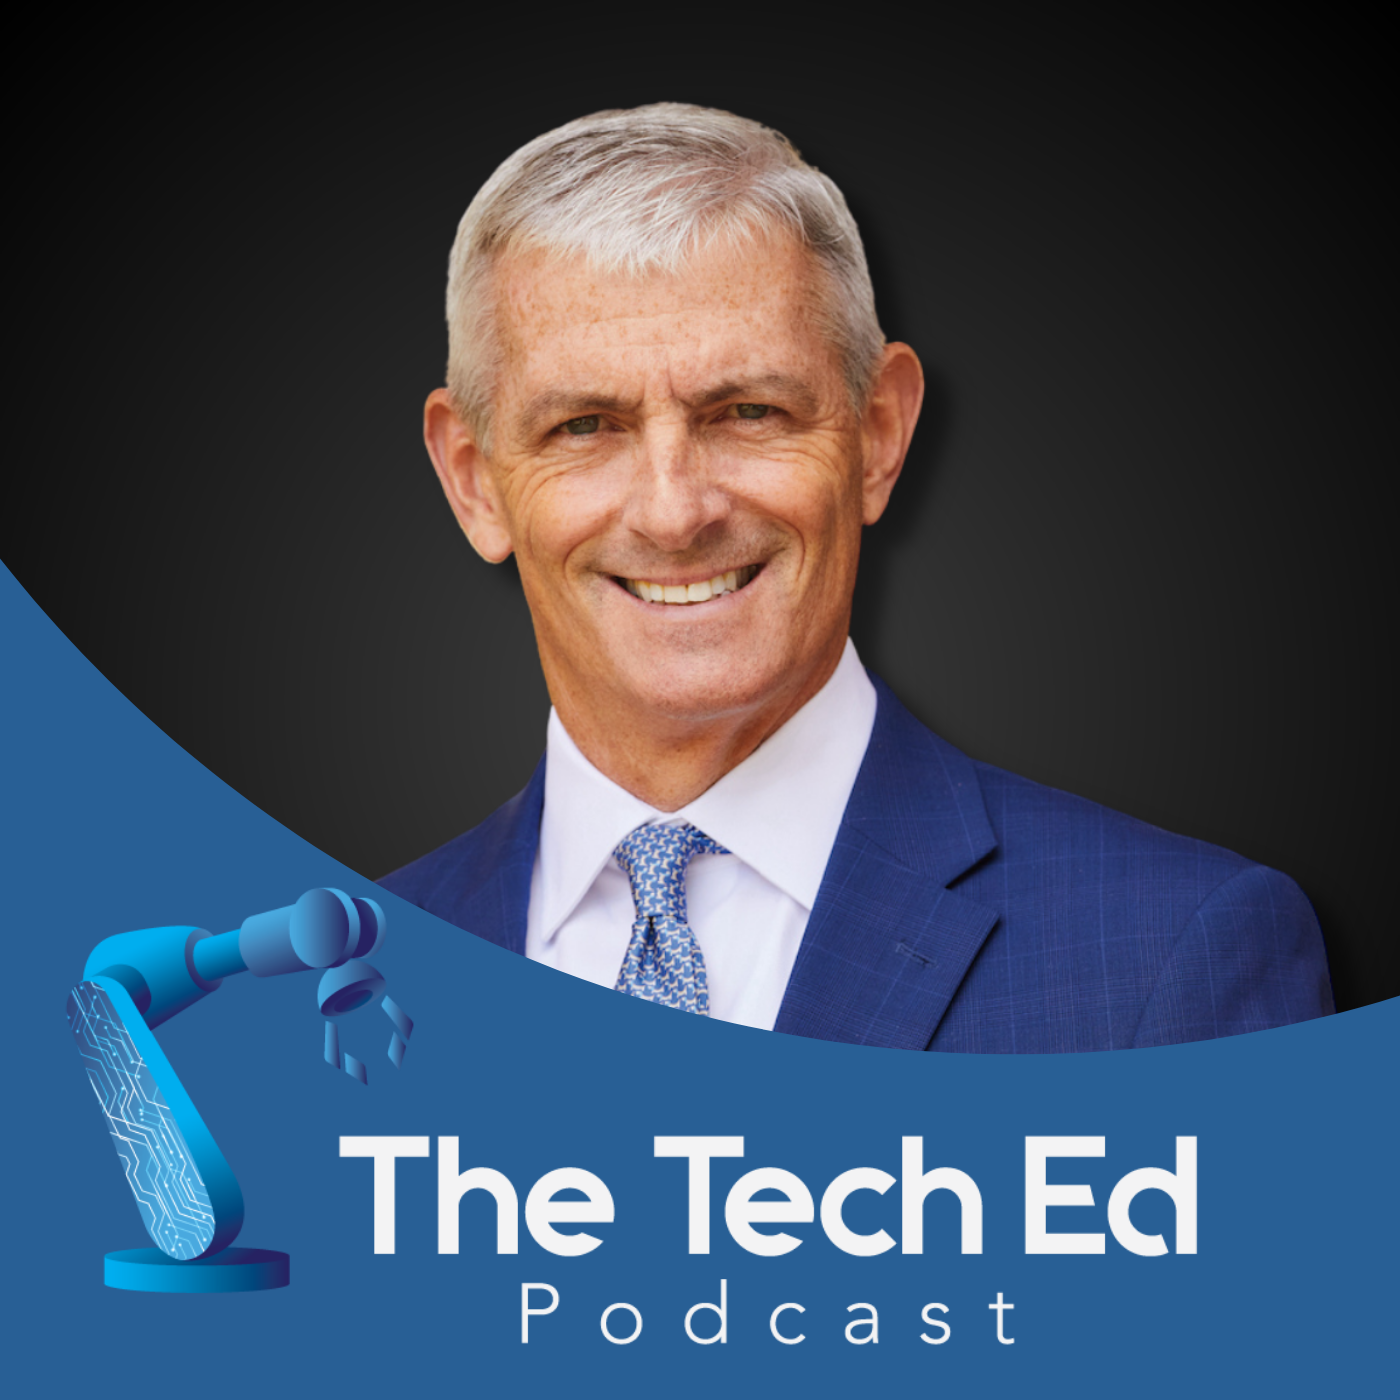 Dr Michael Lovell on The TechEd Podcast